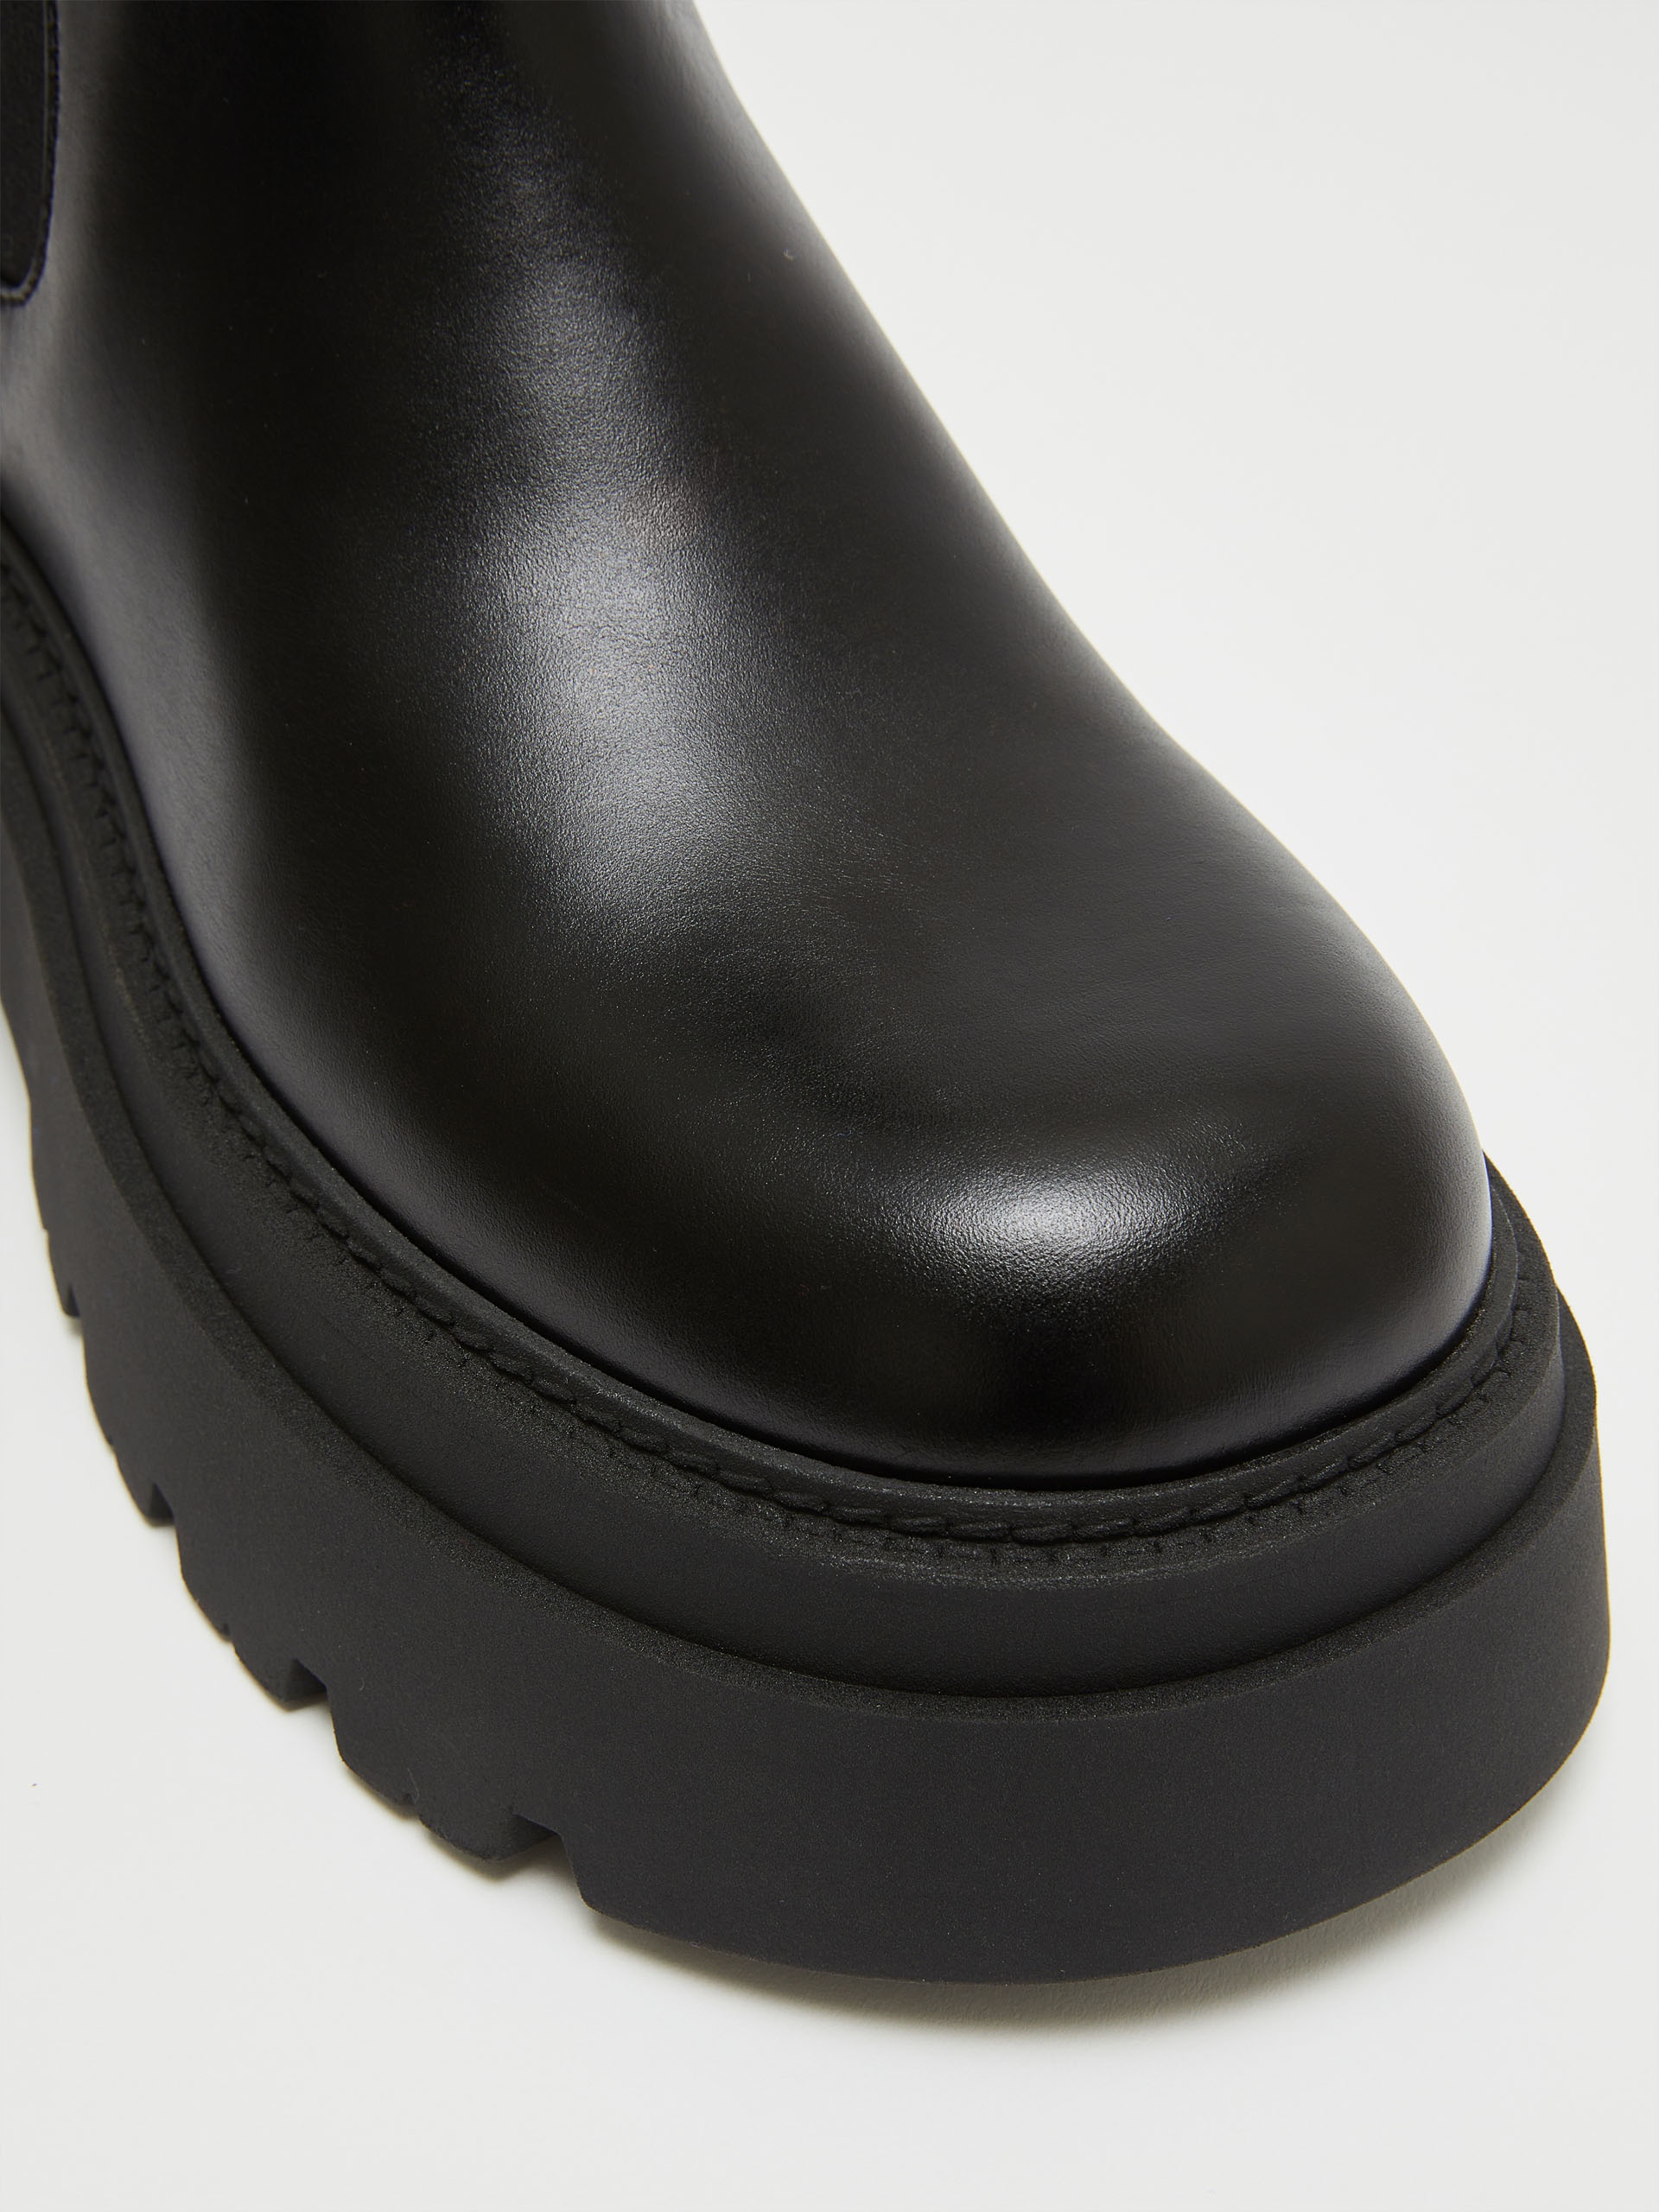 Leather Chelsea boots - 4